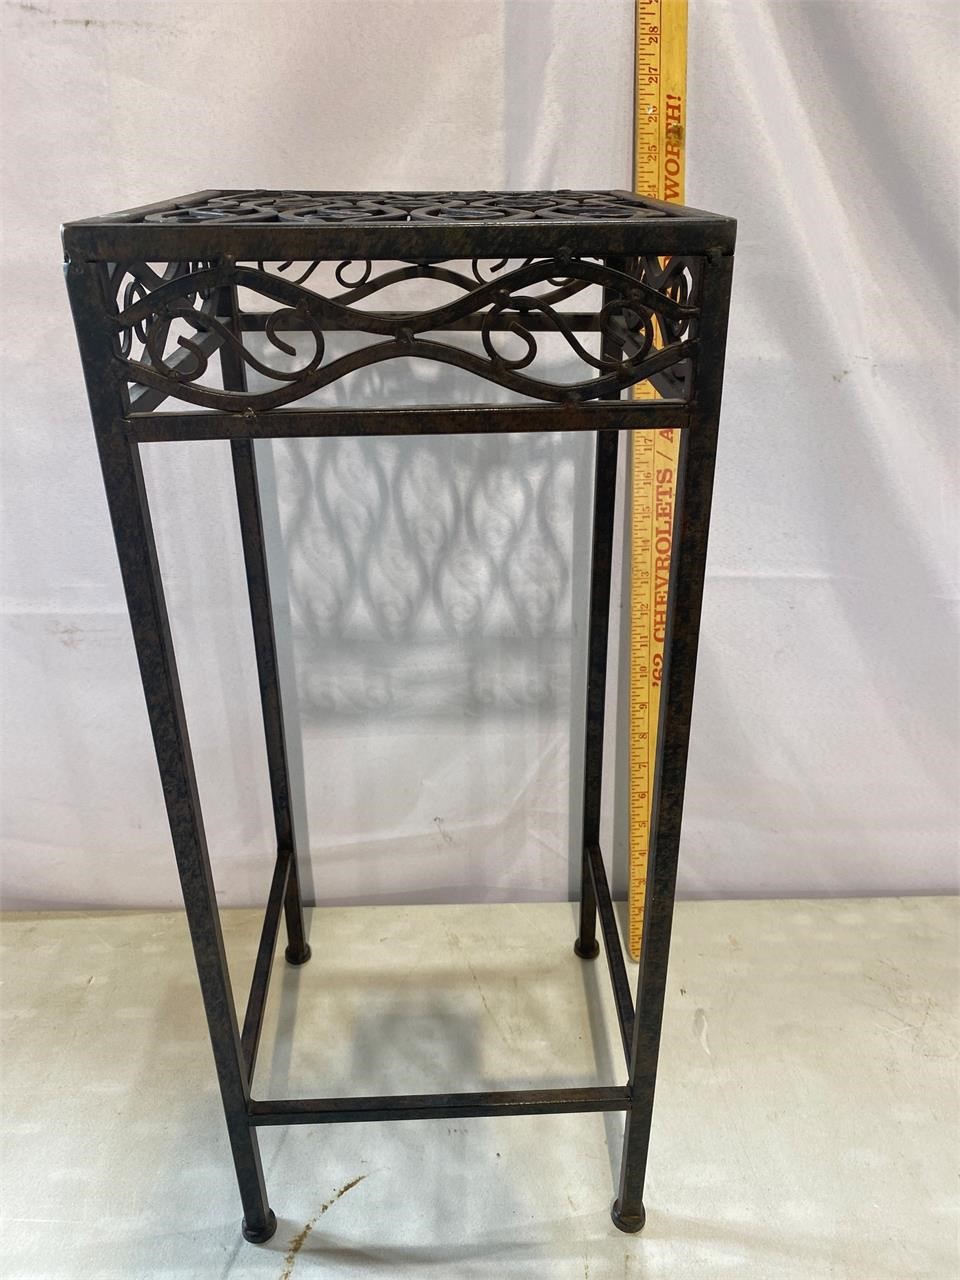 23” Plant Stand